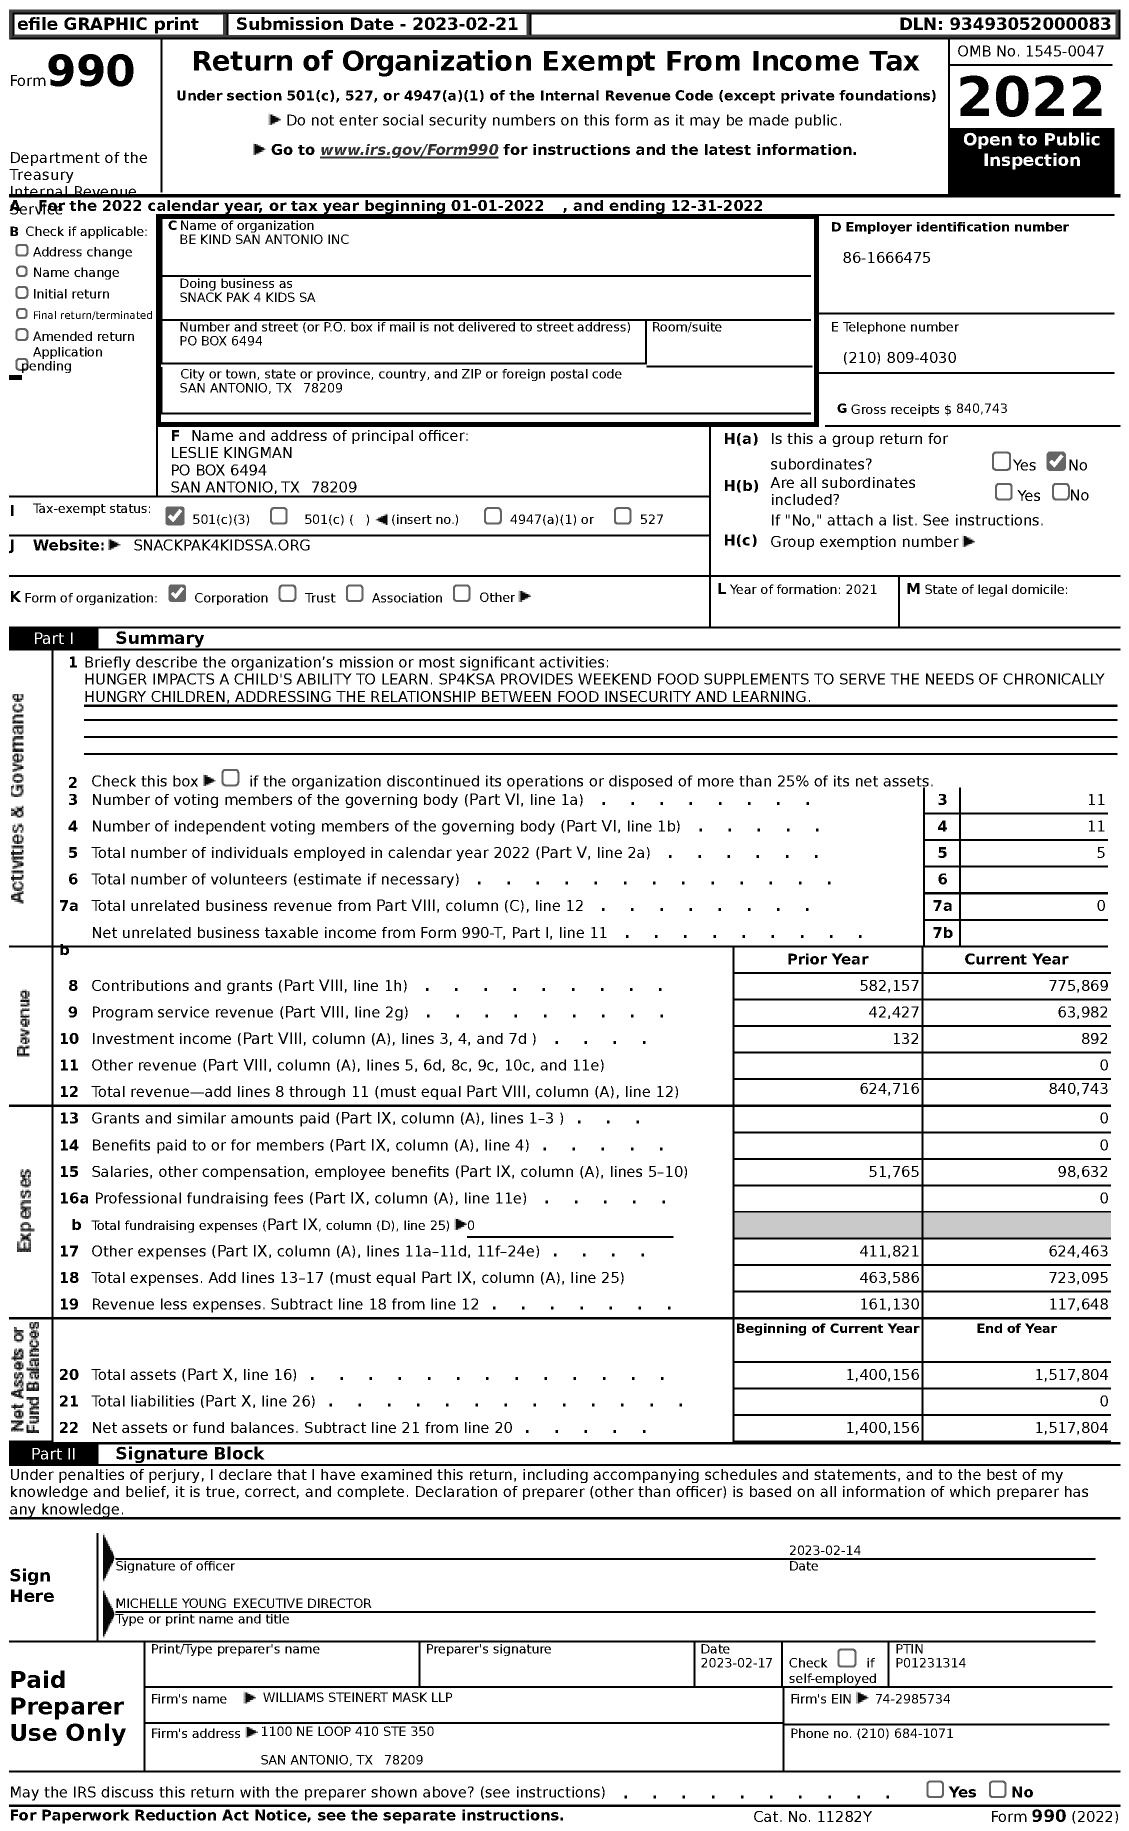 Image of first page of 2022 Form 990 for Snack Pak 4 Kids Sa